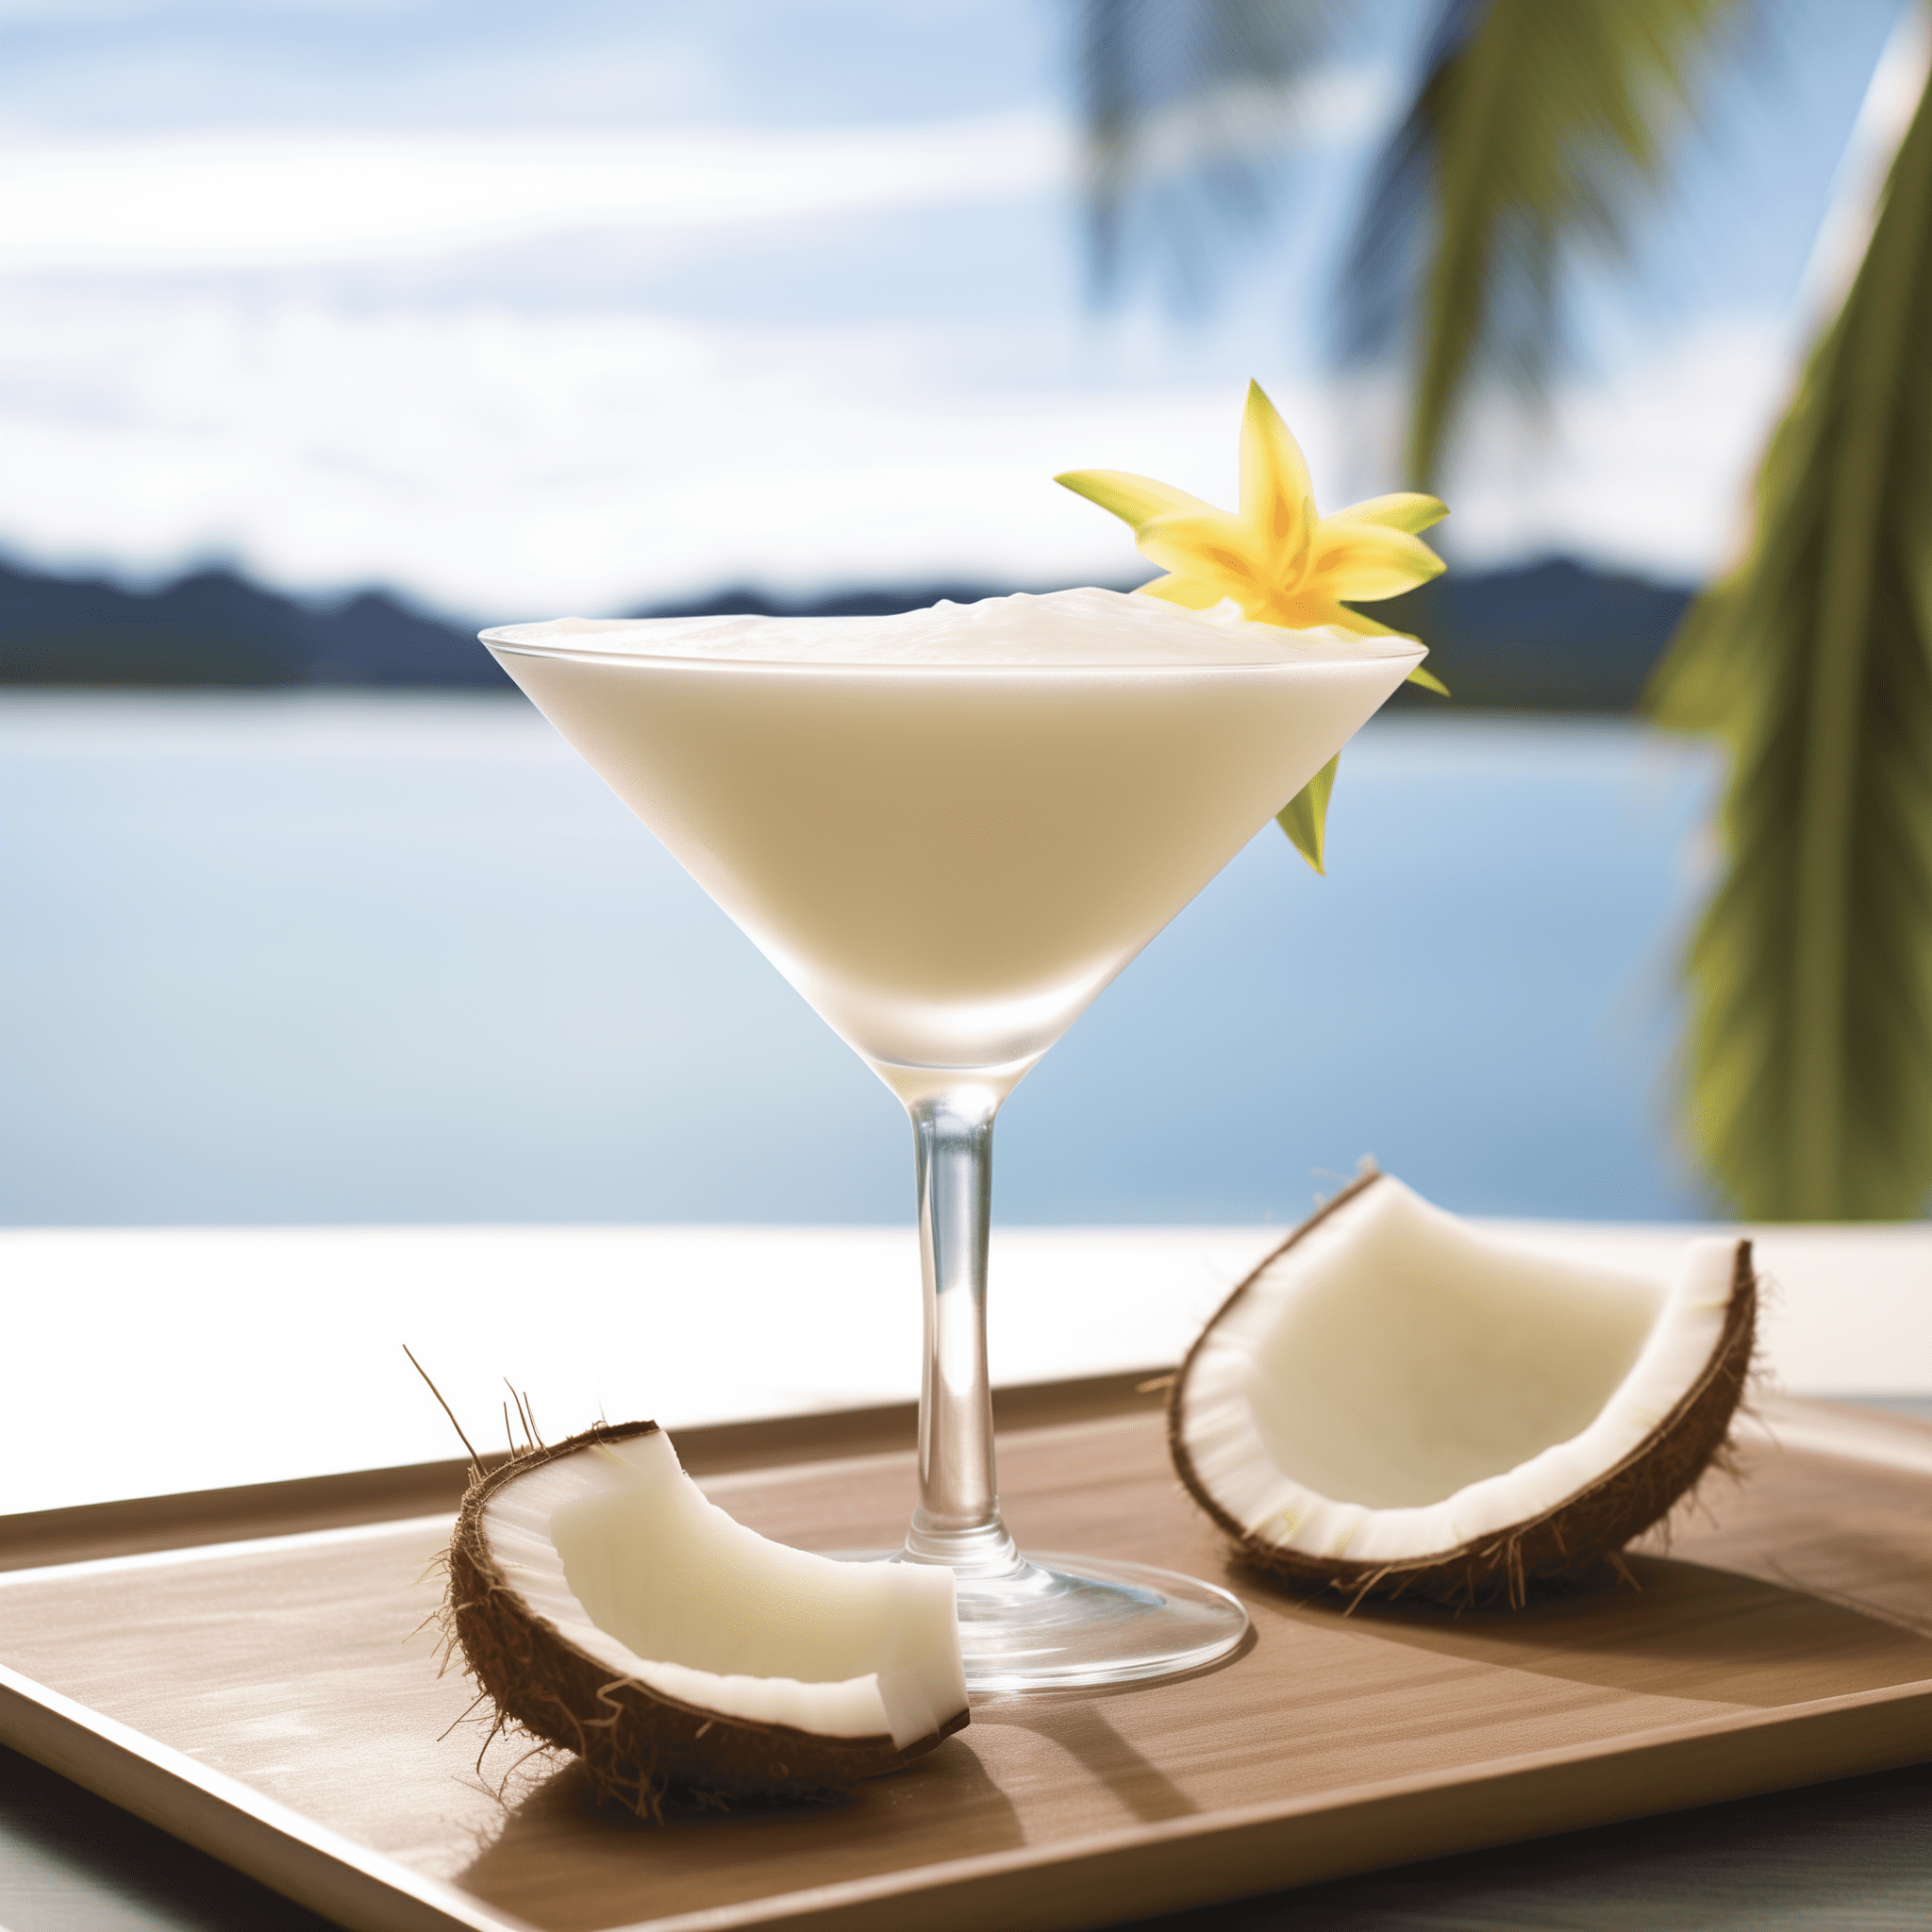 Coconut Cloud Martini Cocktail Recipe - The Coconut Cloud Martini is a symphony of sweet and creamy flavors with a hint of vanilla and a smooth coconut finish. It's rich without being overpowering and has a luxurious mouthfeel that dances on the palate.